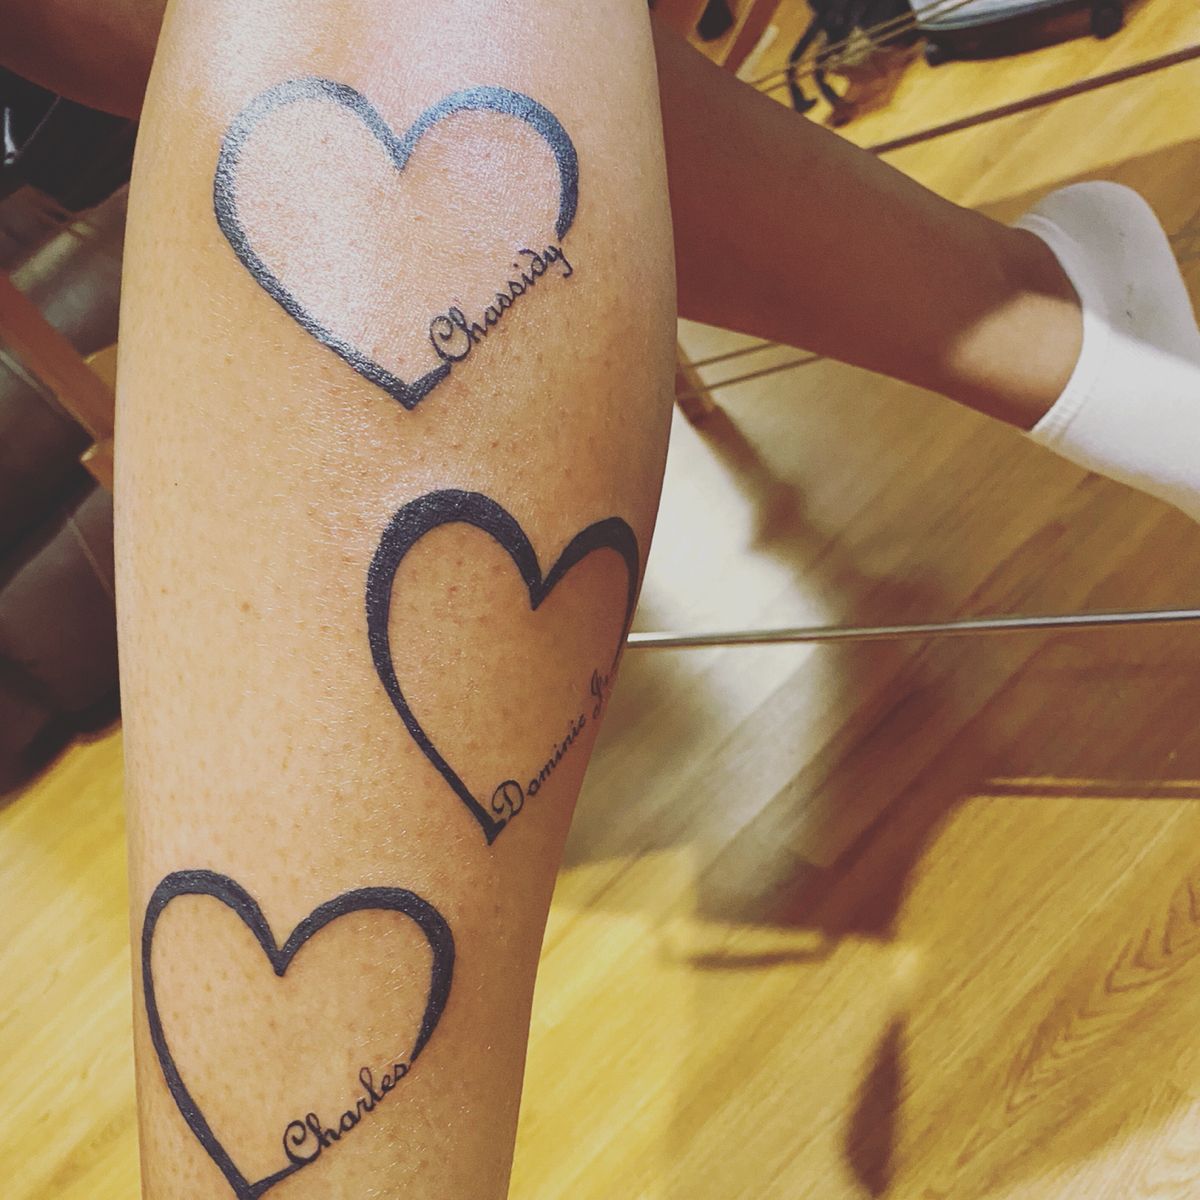 Three Hearts Tattoo Meaning: The Deeper Meanings Behind Popular Tattoo Designs